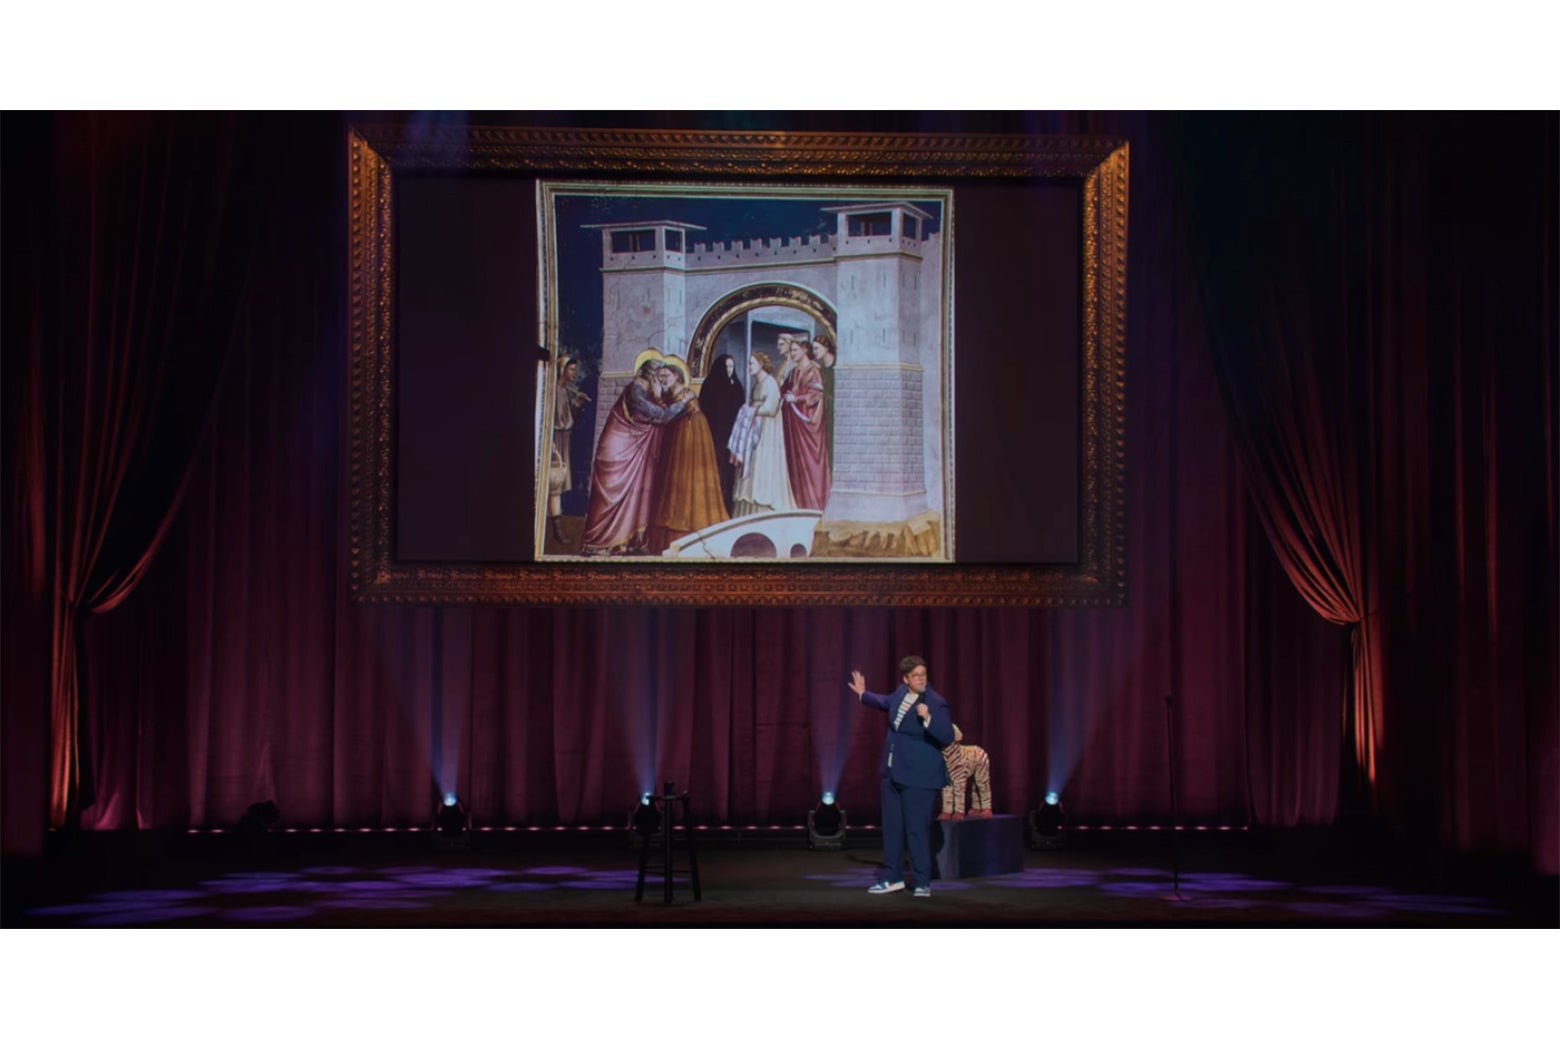 Hannah Gadsby onstage in front of a projection of Giotto's Meeting at the Golden Gate, which shows two people in brightly colored clothes embracing; a woman dressed in black is walking away from them.